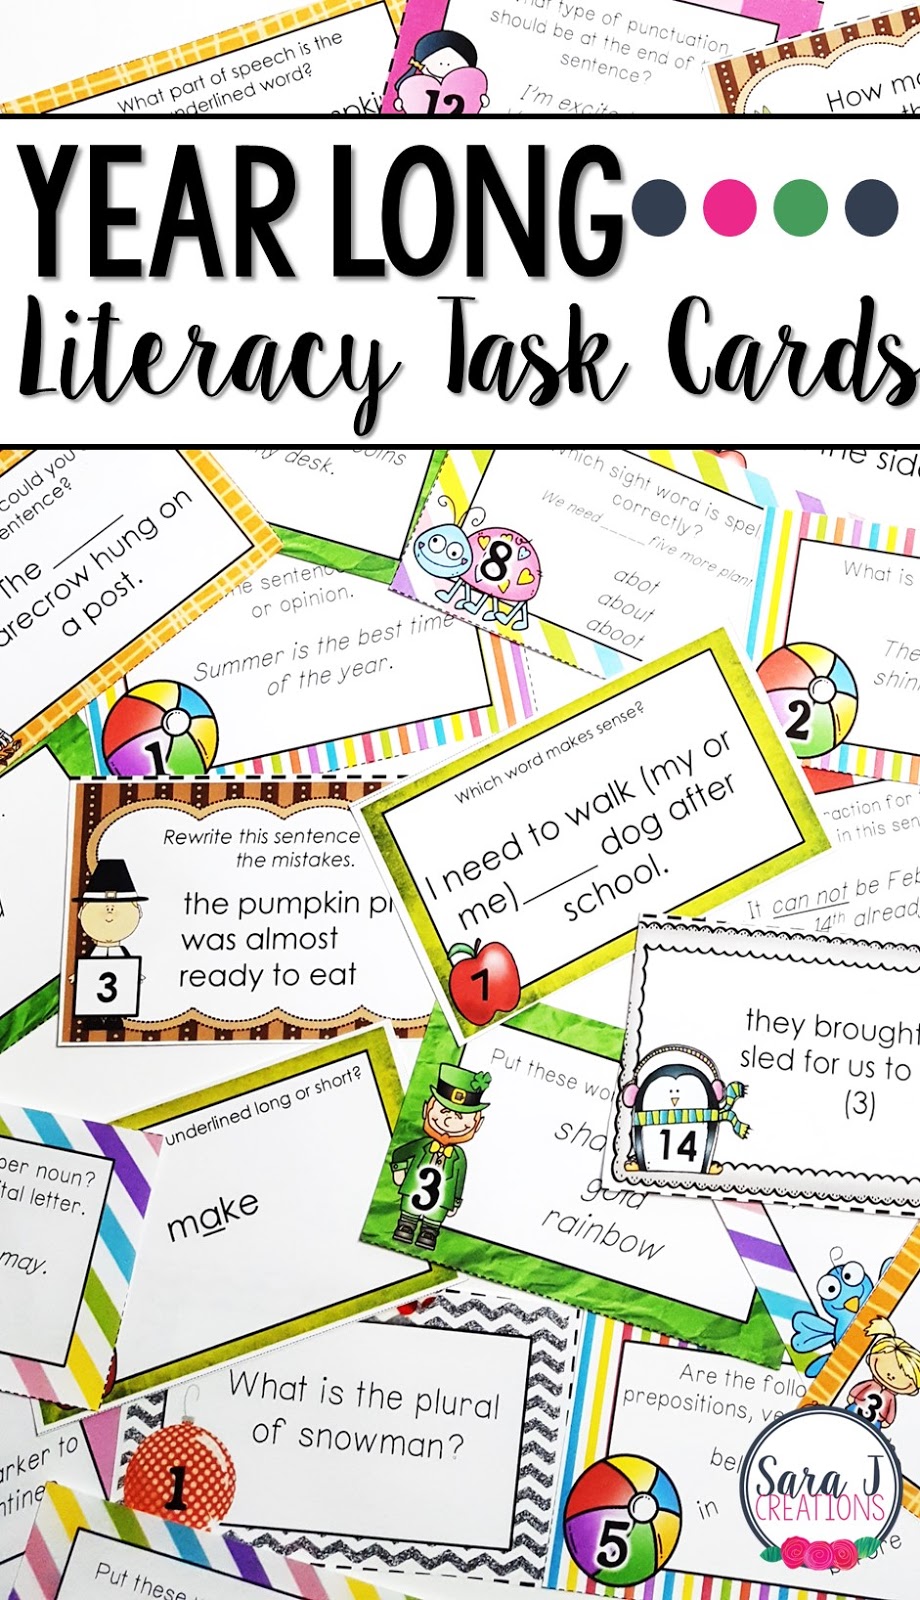 Literacy task card bundle for the whole year includes holidays and seasons celebrated during the school year. Great way to review parts of speech, abc order, sight words and more!